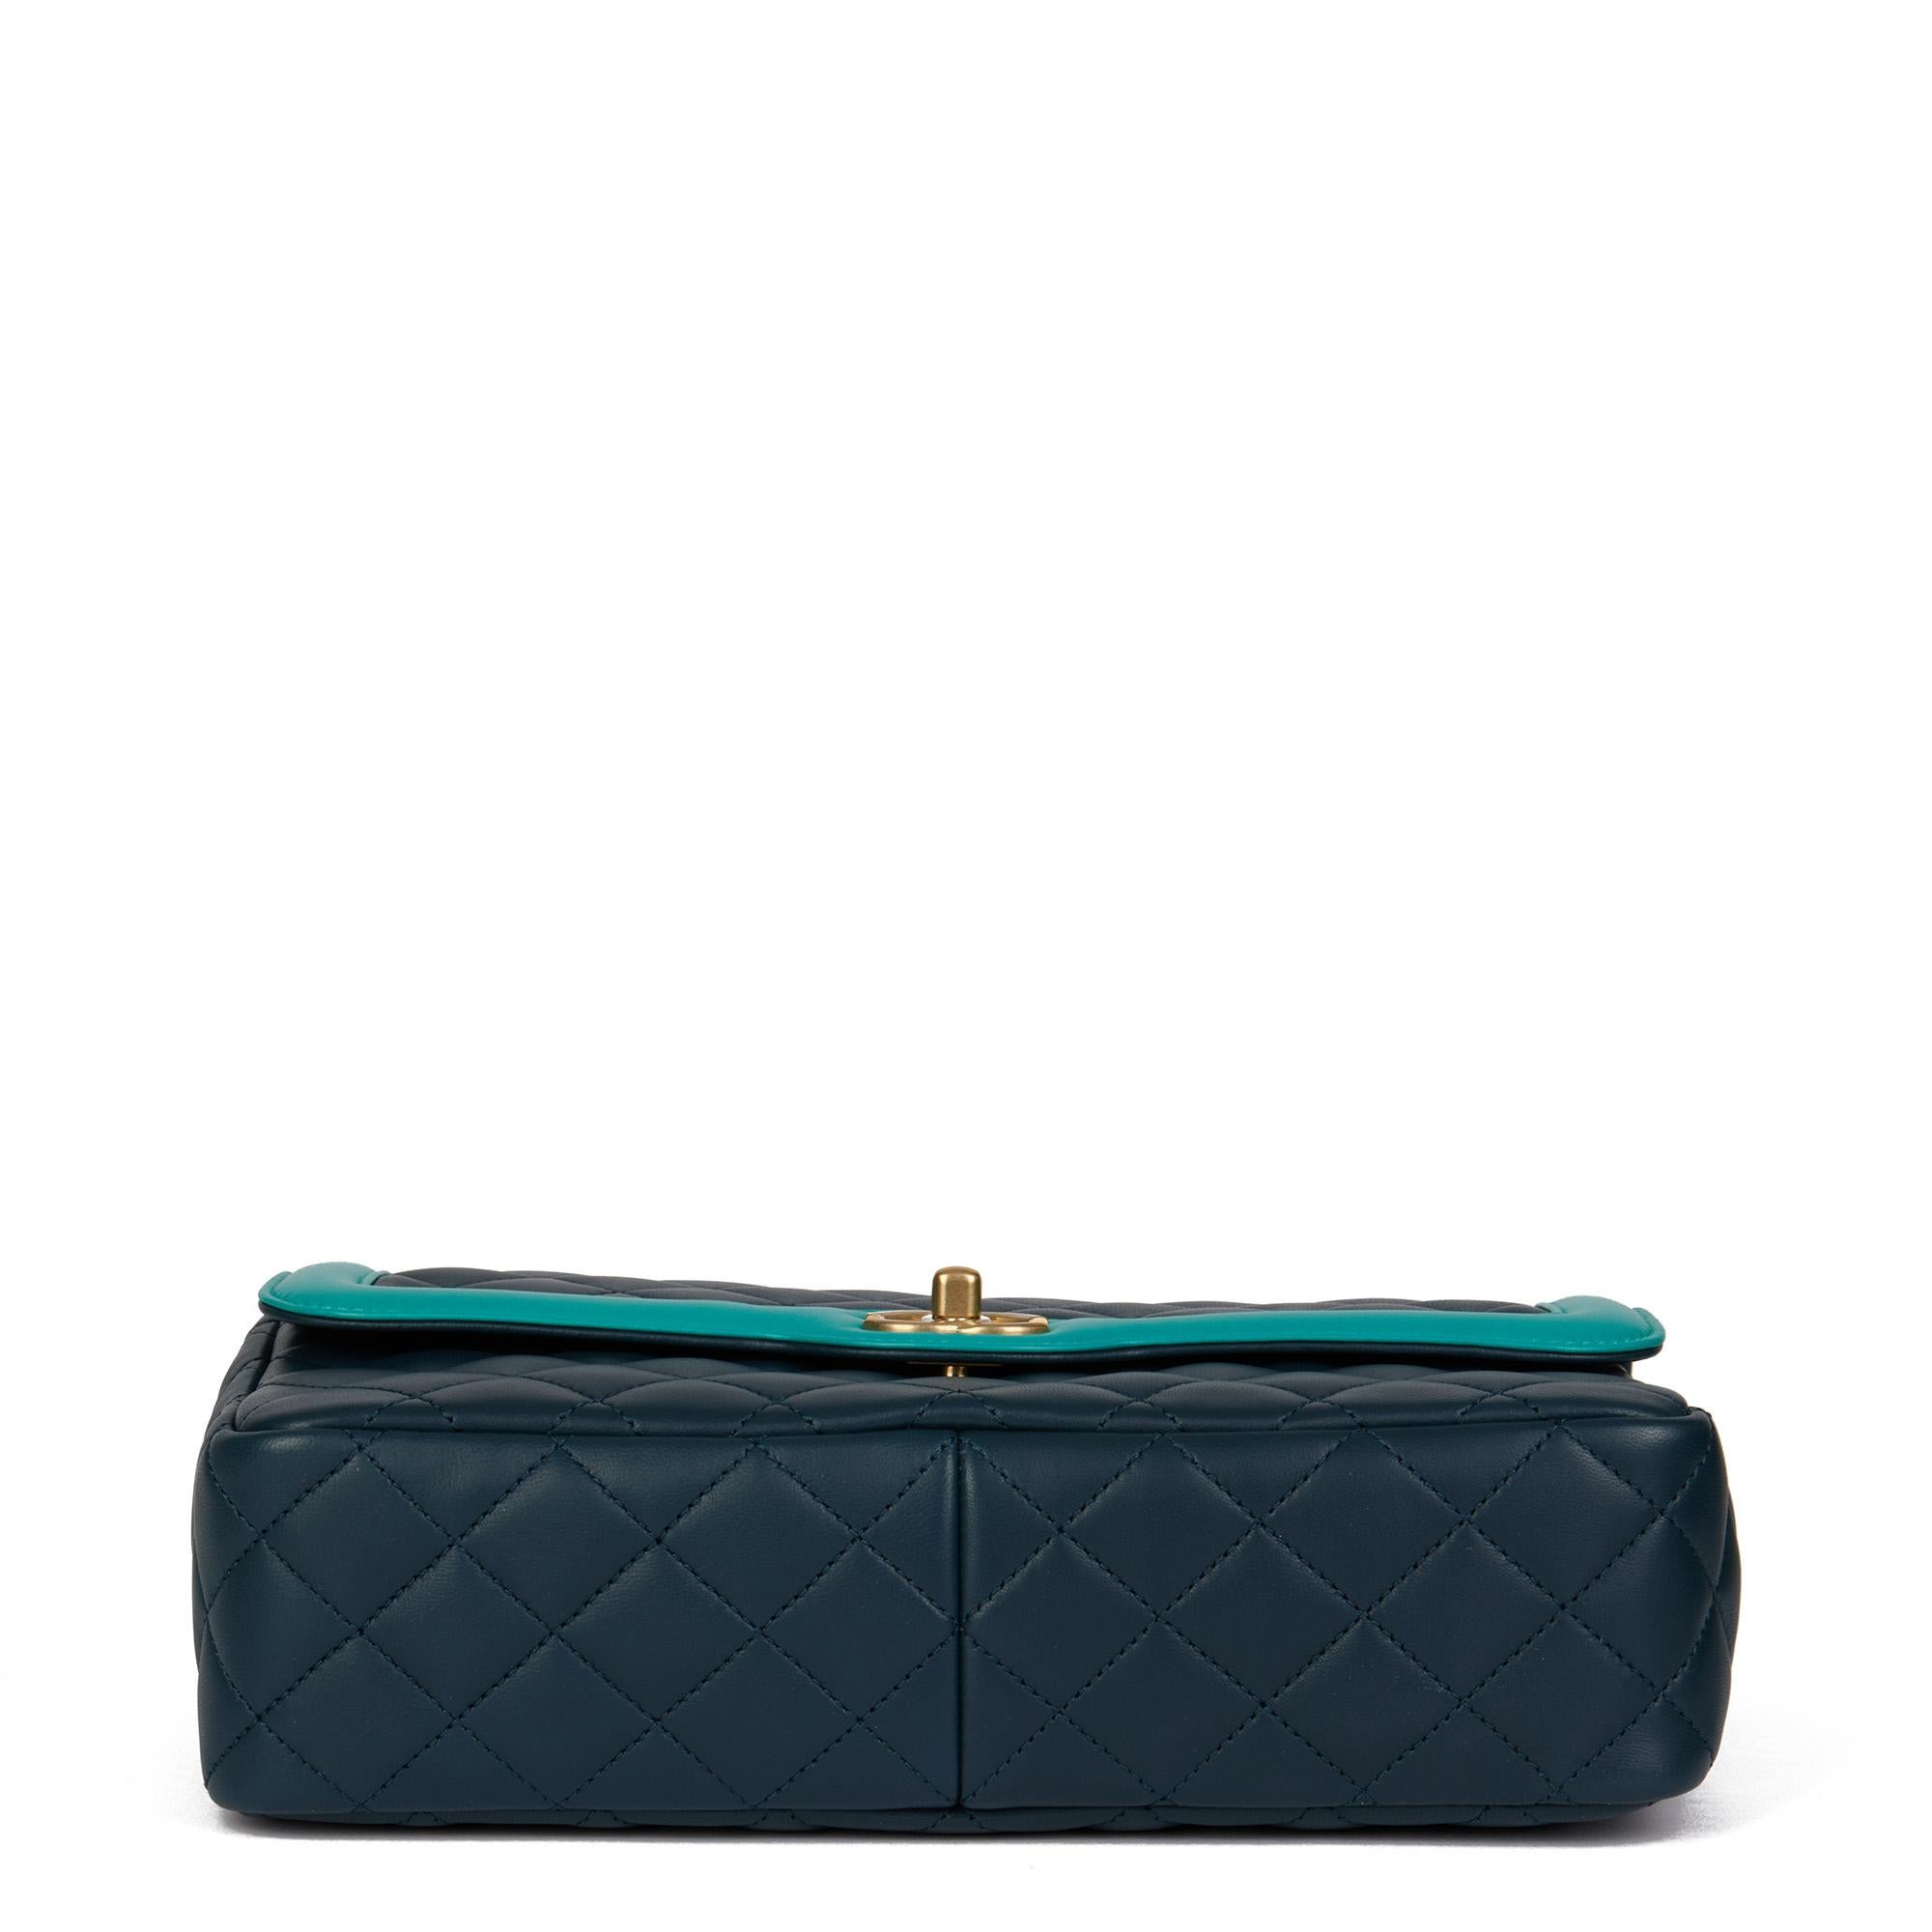 CHANEL Navy & Turquoise Quilted Lambskin Medium Classic Single Flap Bag 1